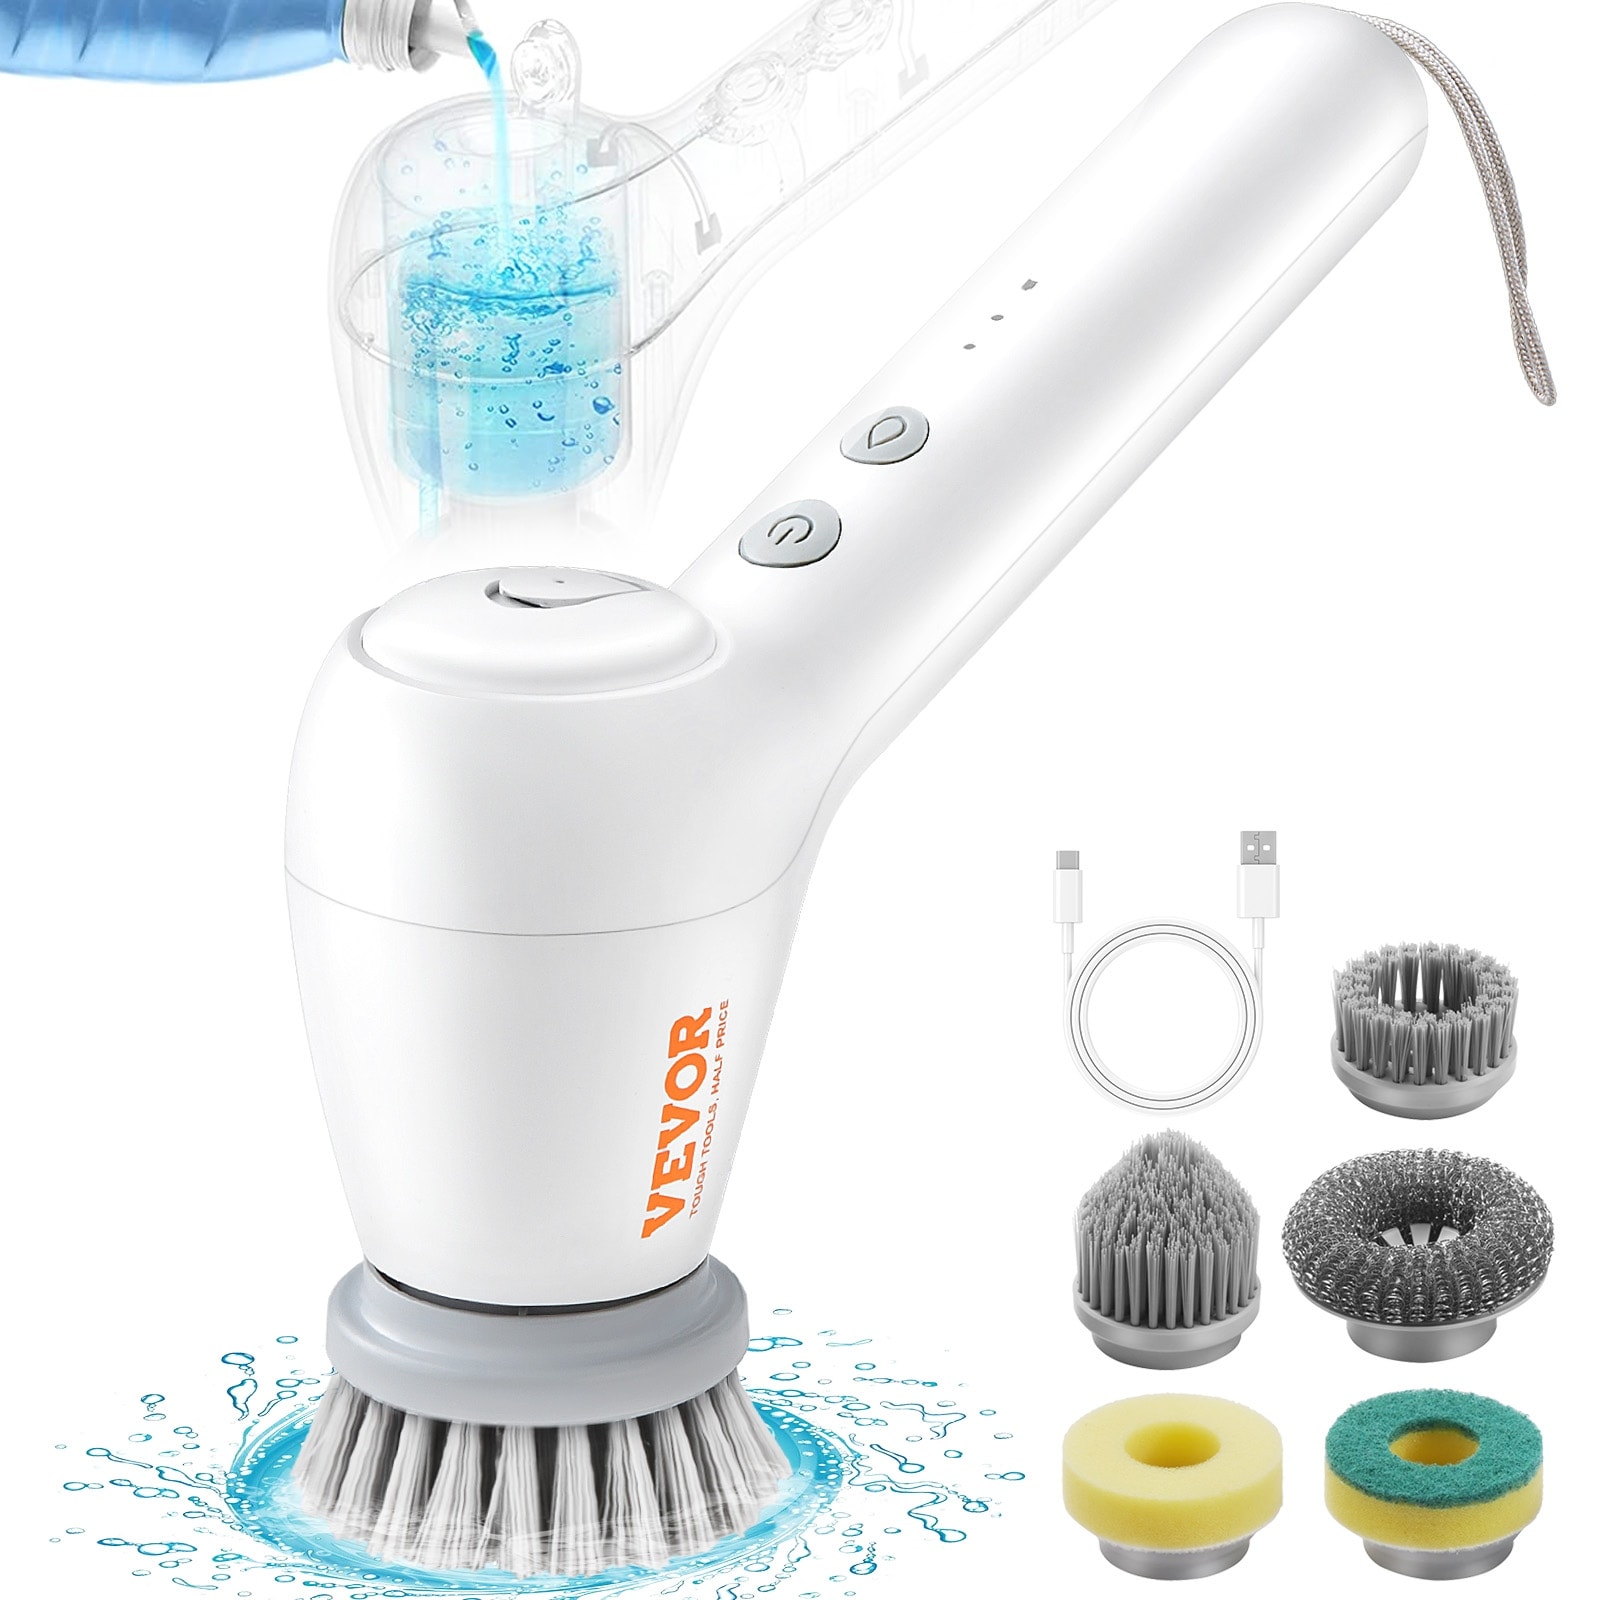 https://ak1.ostkcdn.com/images/products/is/images/direct/c9f434de3ea4606dd40b6c739ad441b3591a7c8f/VEVOR-Electric-Scrubber-Cordless-Auto-Detergent-Dispenser-2-Speeds-5-Replaceable-Heads.jpg